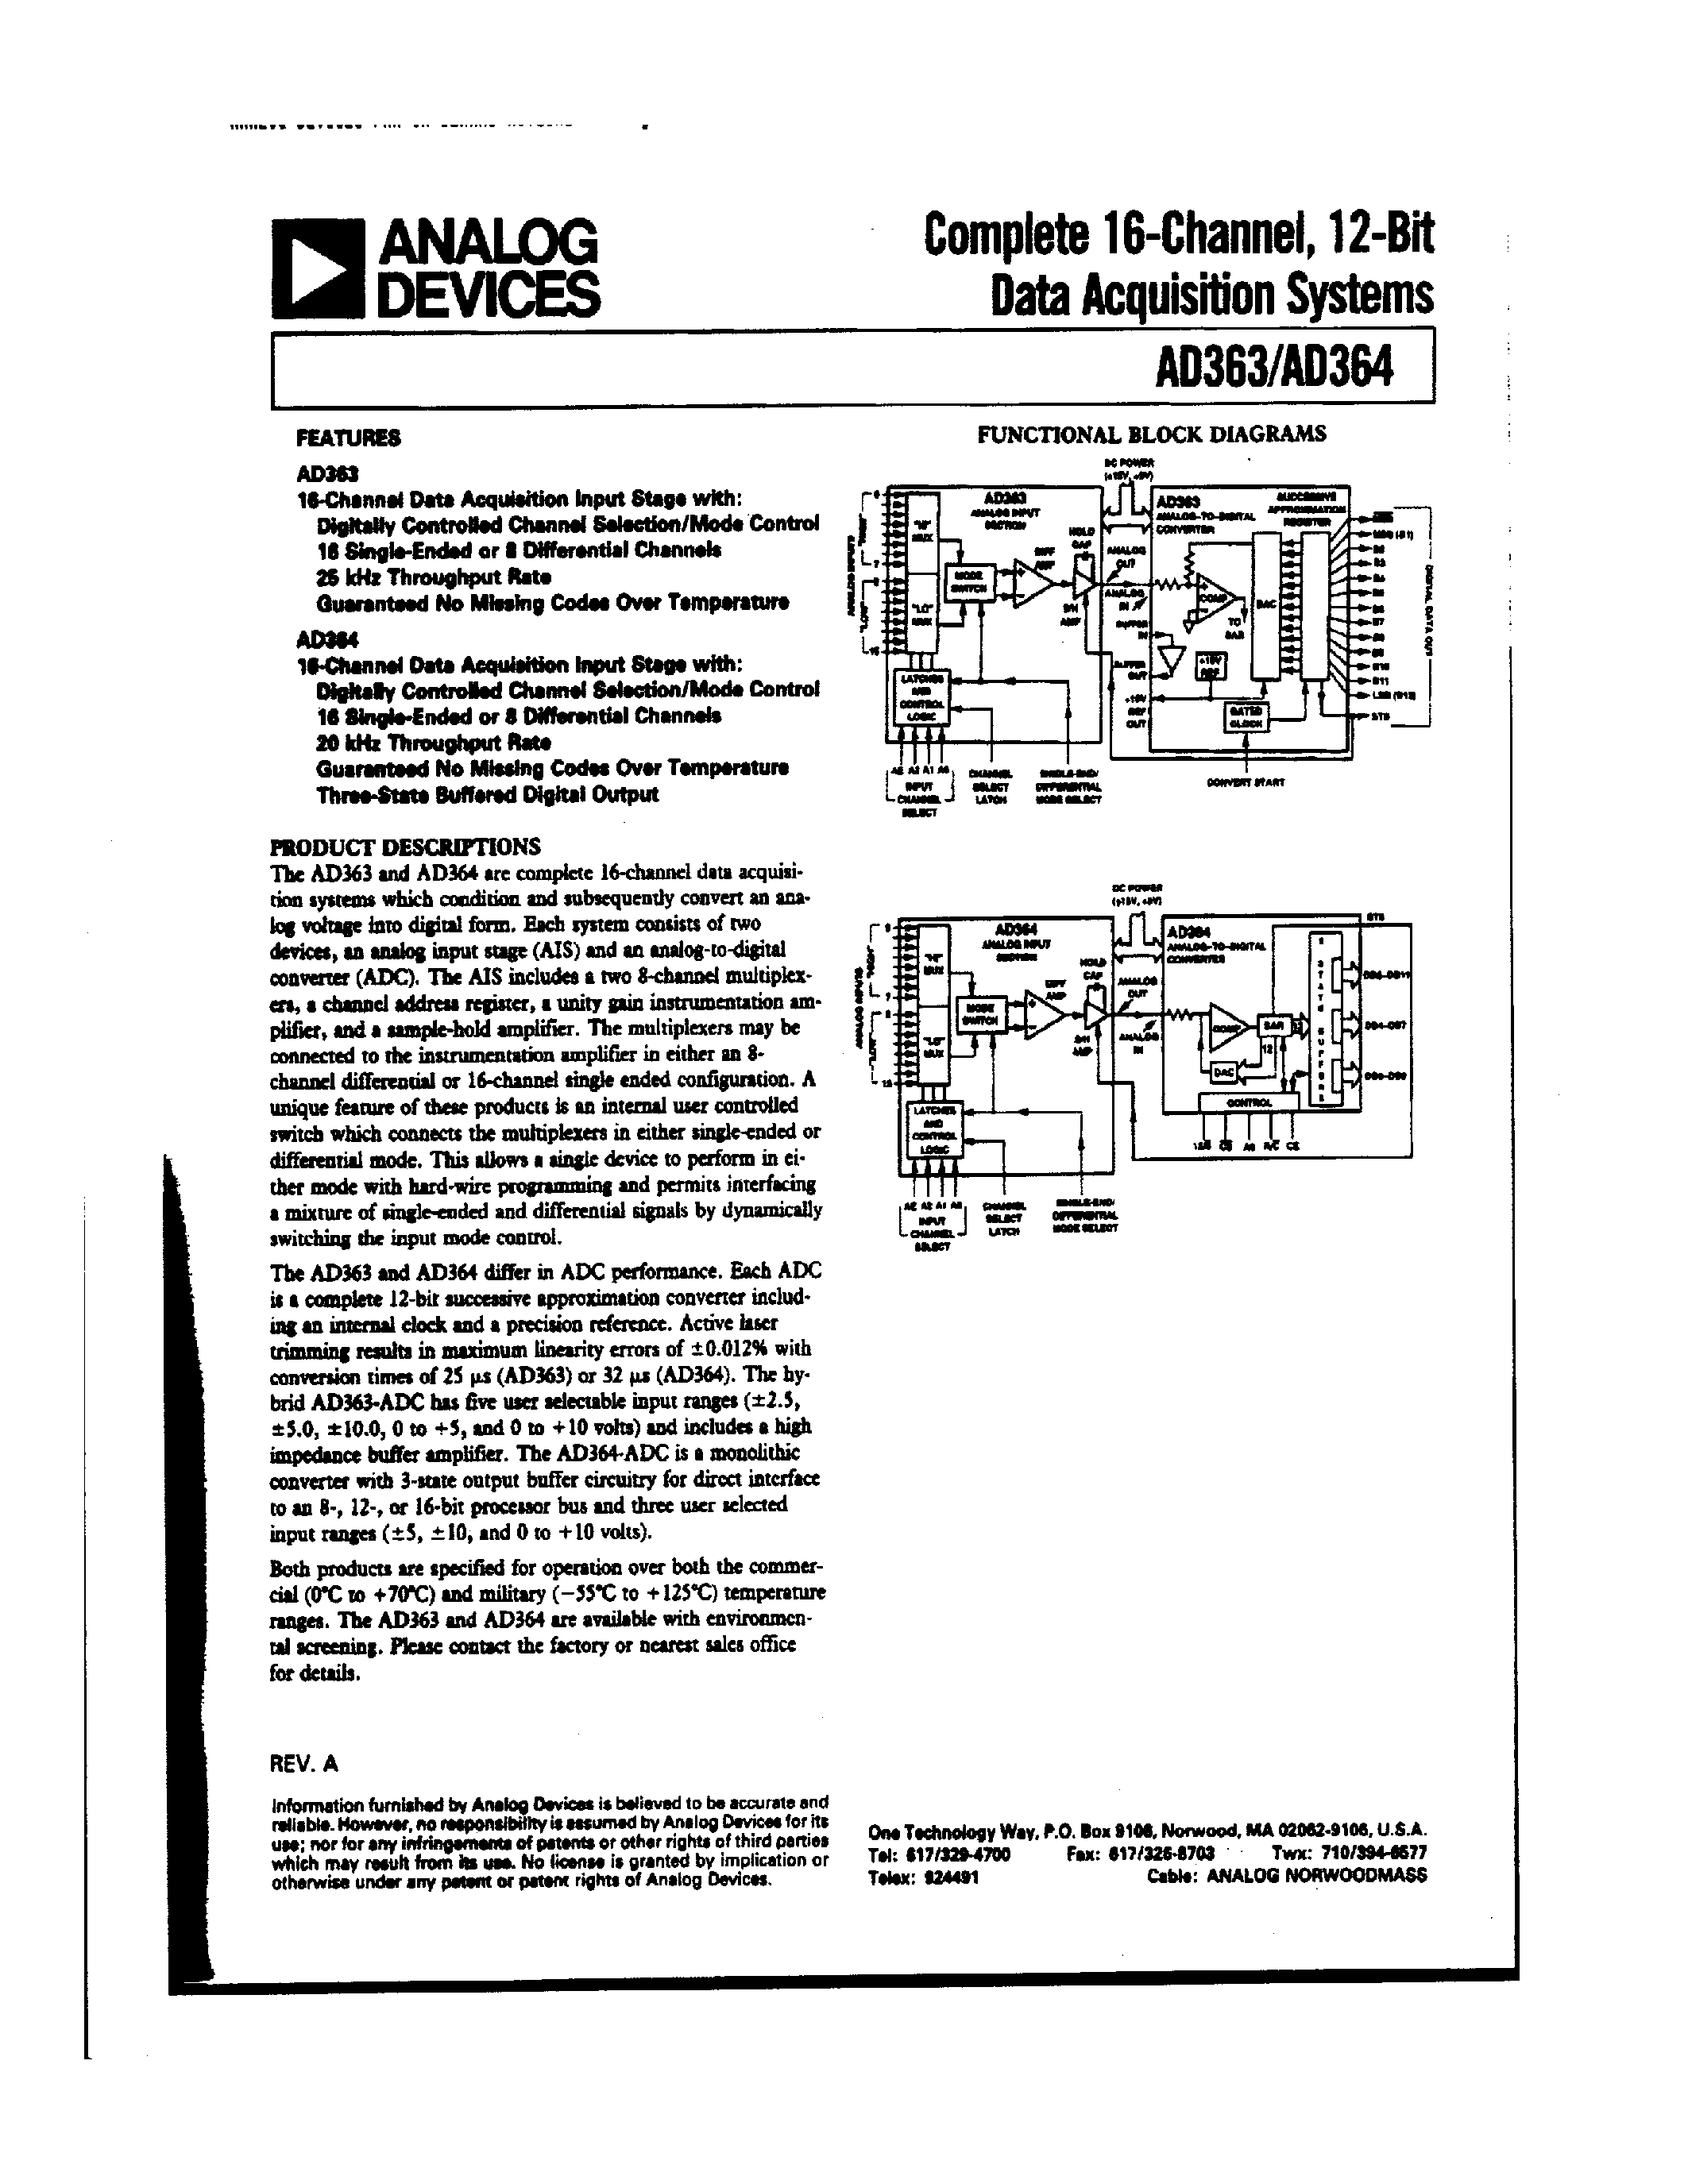 Datasheet AD364 - Complete 16-Channel/12-Bit Data Acquisition System page 1